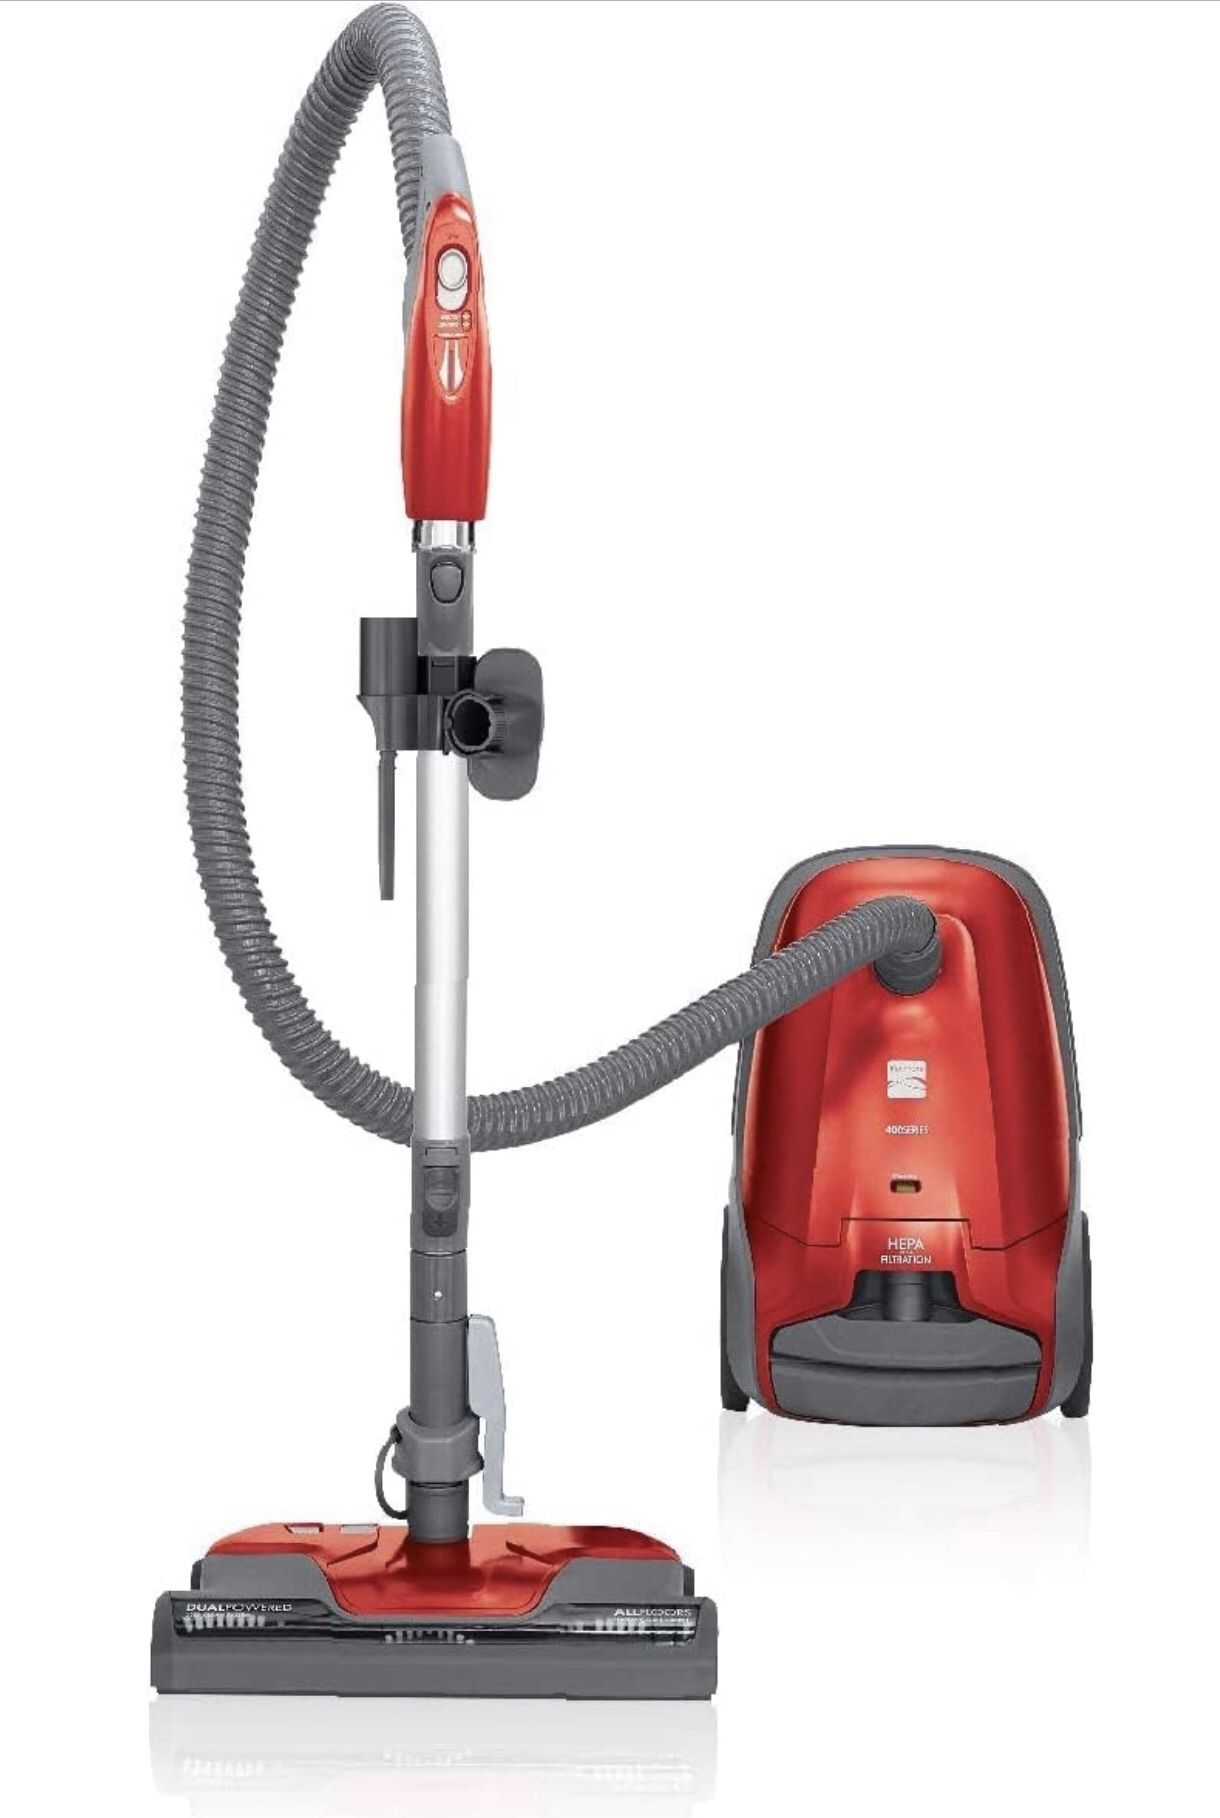 Kenmore 81414 Bagged Canister Vacuum Cleaning Tools, 400 Series + Telescoping Wand, Red